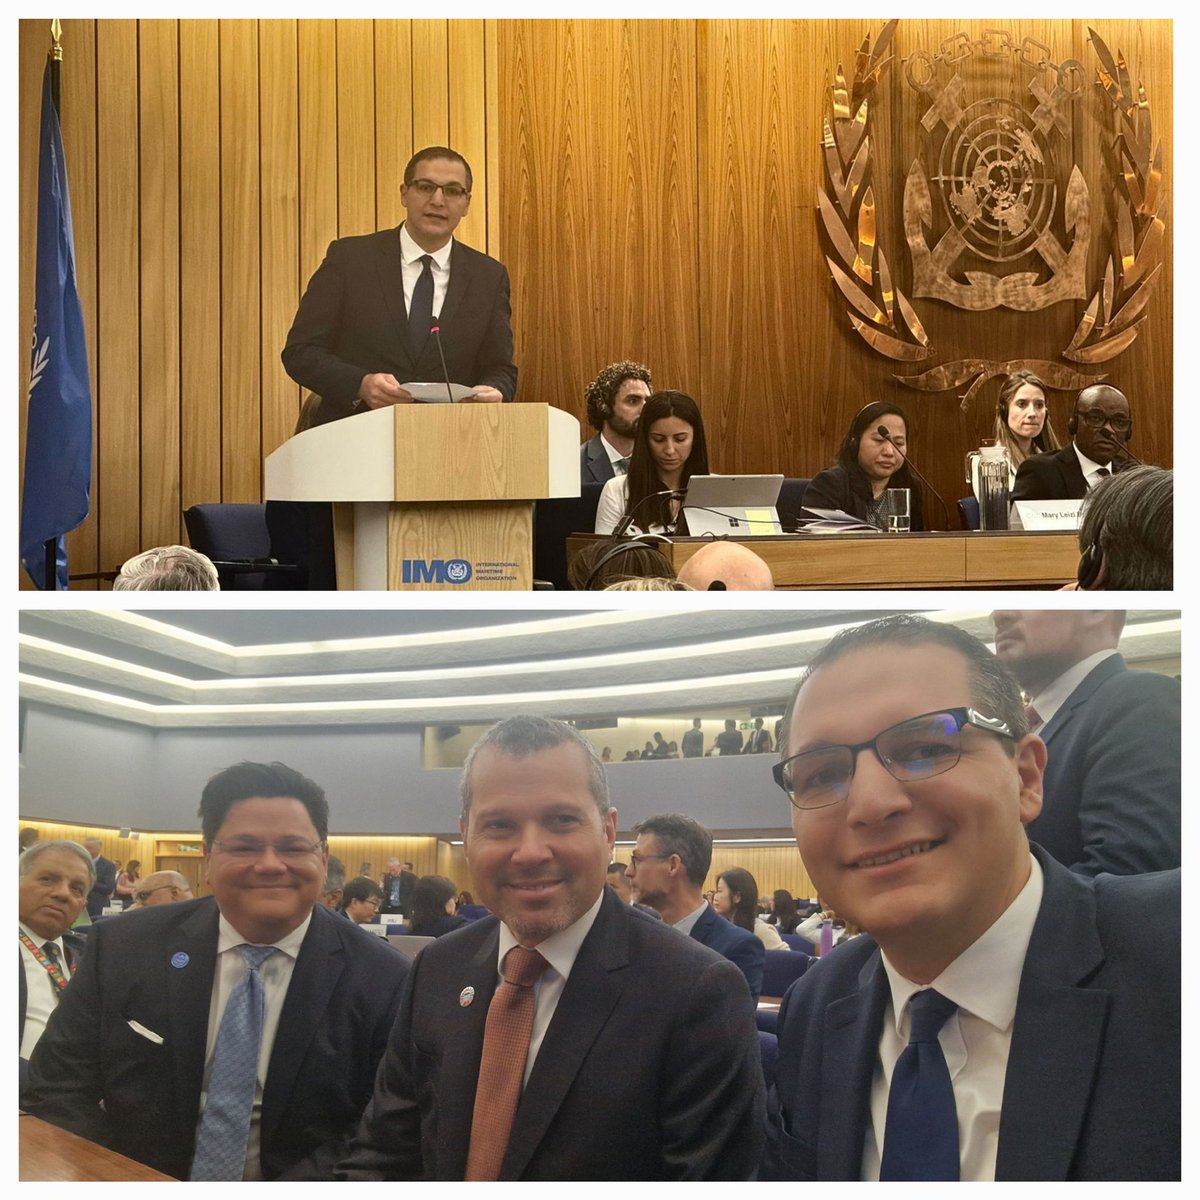 Addressed the plenary at the @IMOHQ during an event marking the 35th anniversary of @imoimli. Went through the continuing commitment of Malta to the International Maritime Legal Order. Malta has both a legacy and a future role to play in this realm. @IMOSecGen